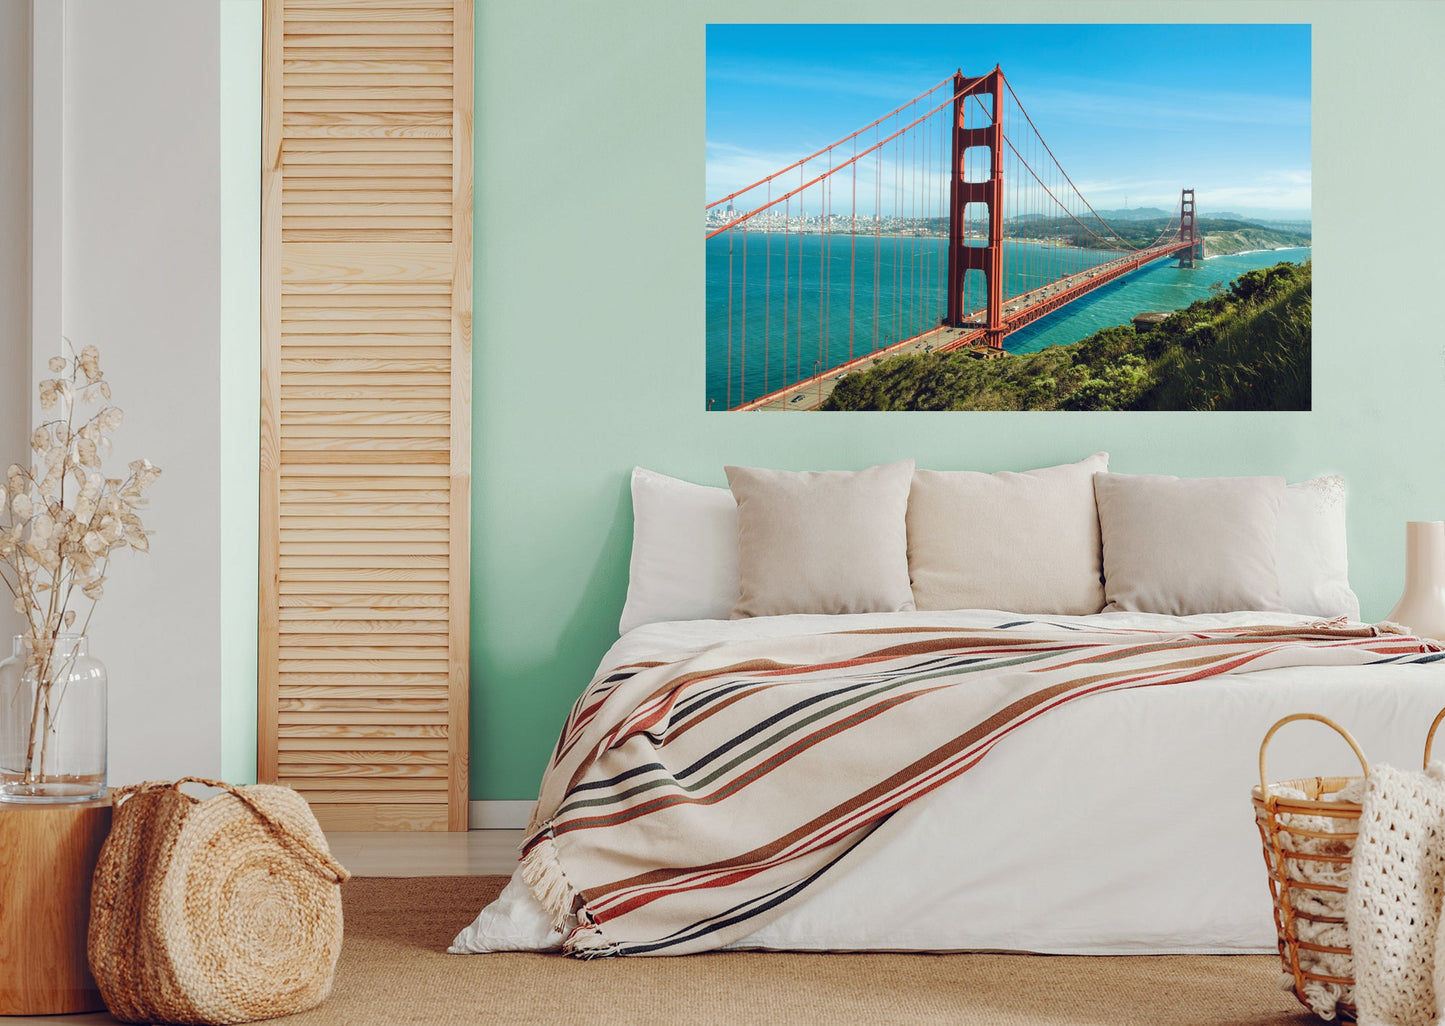 Popular Landmarks: San Francisco Realistic Poster - Removable Adhesive Decal